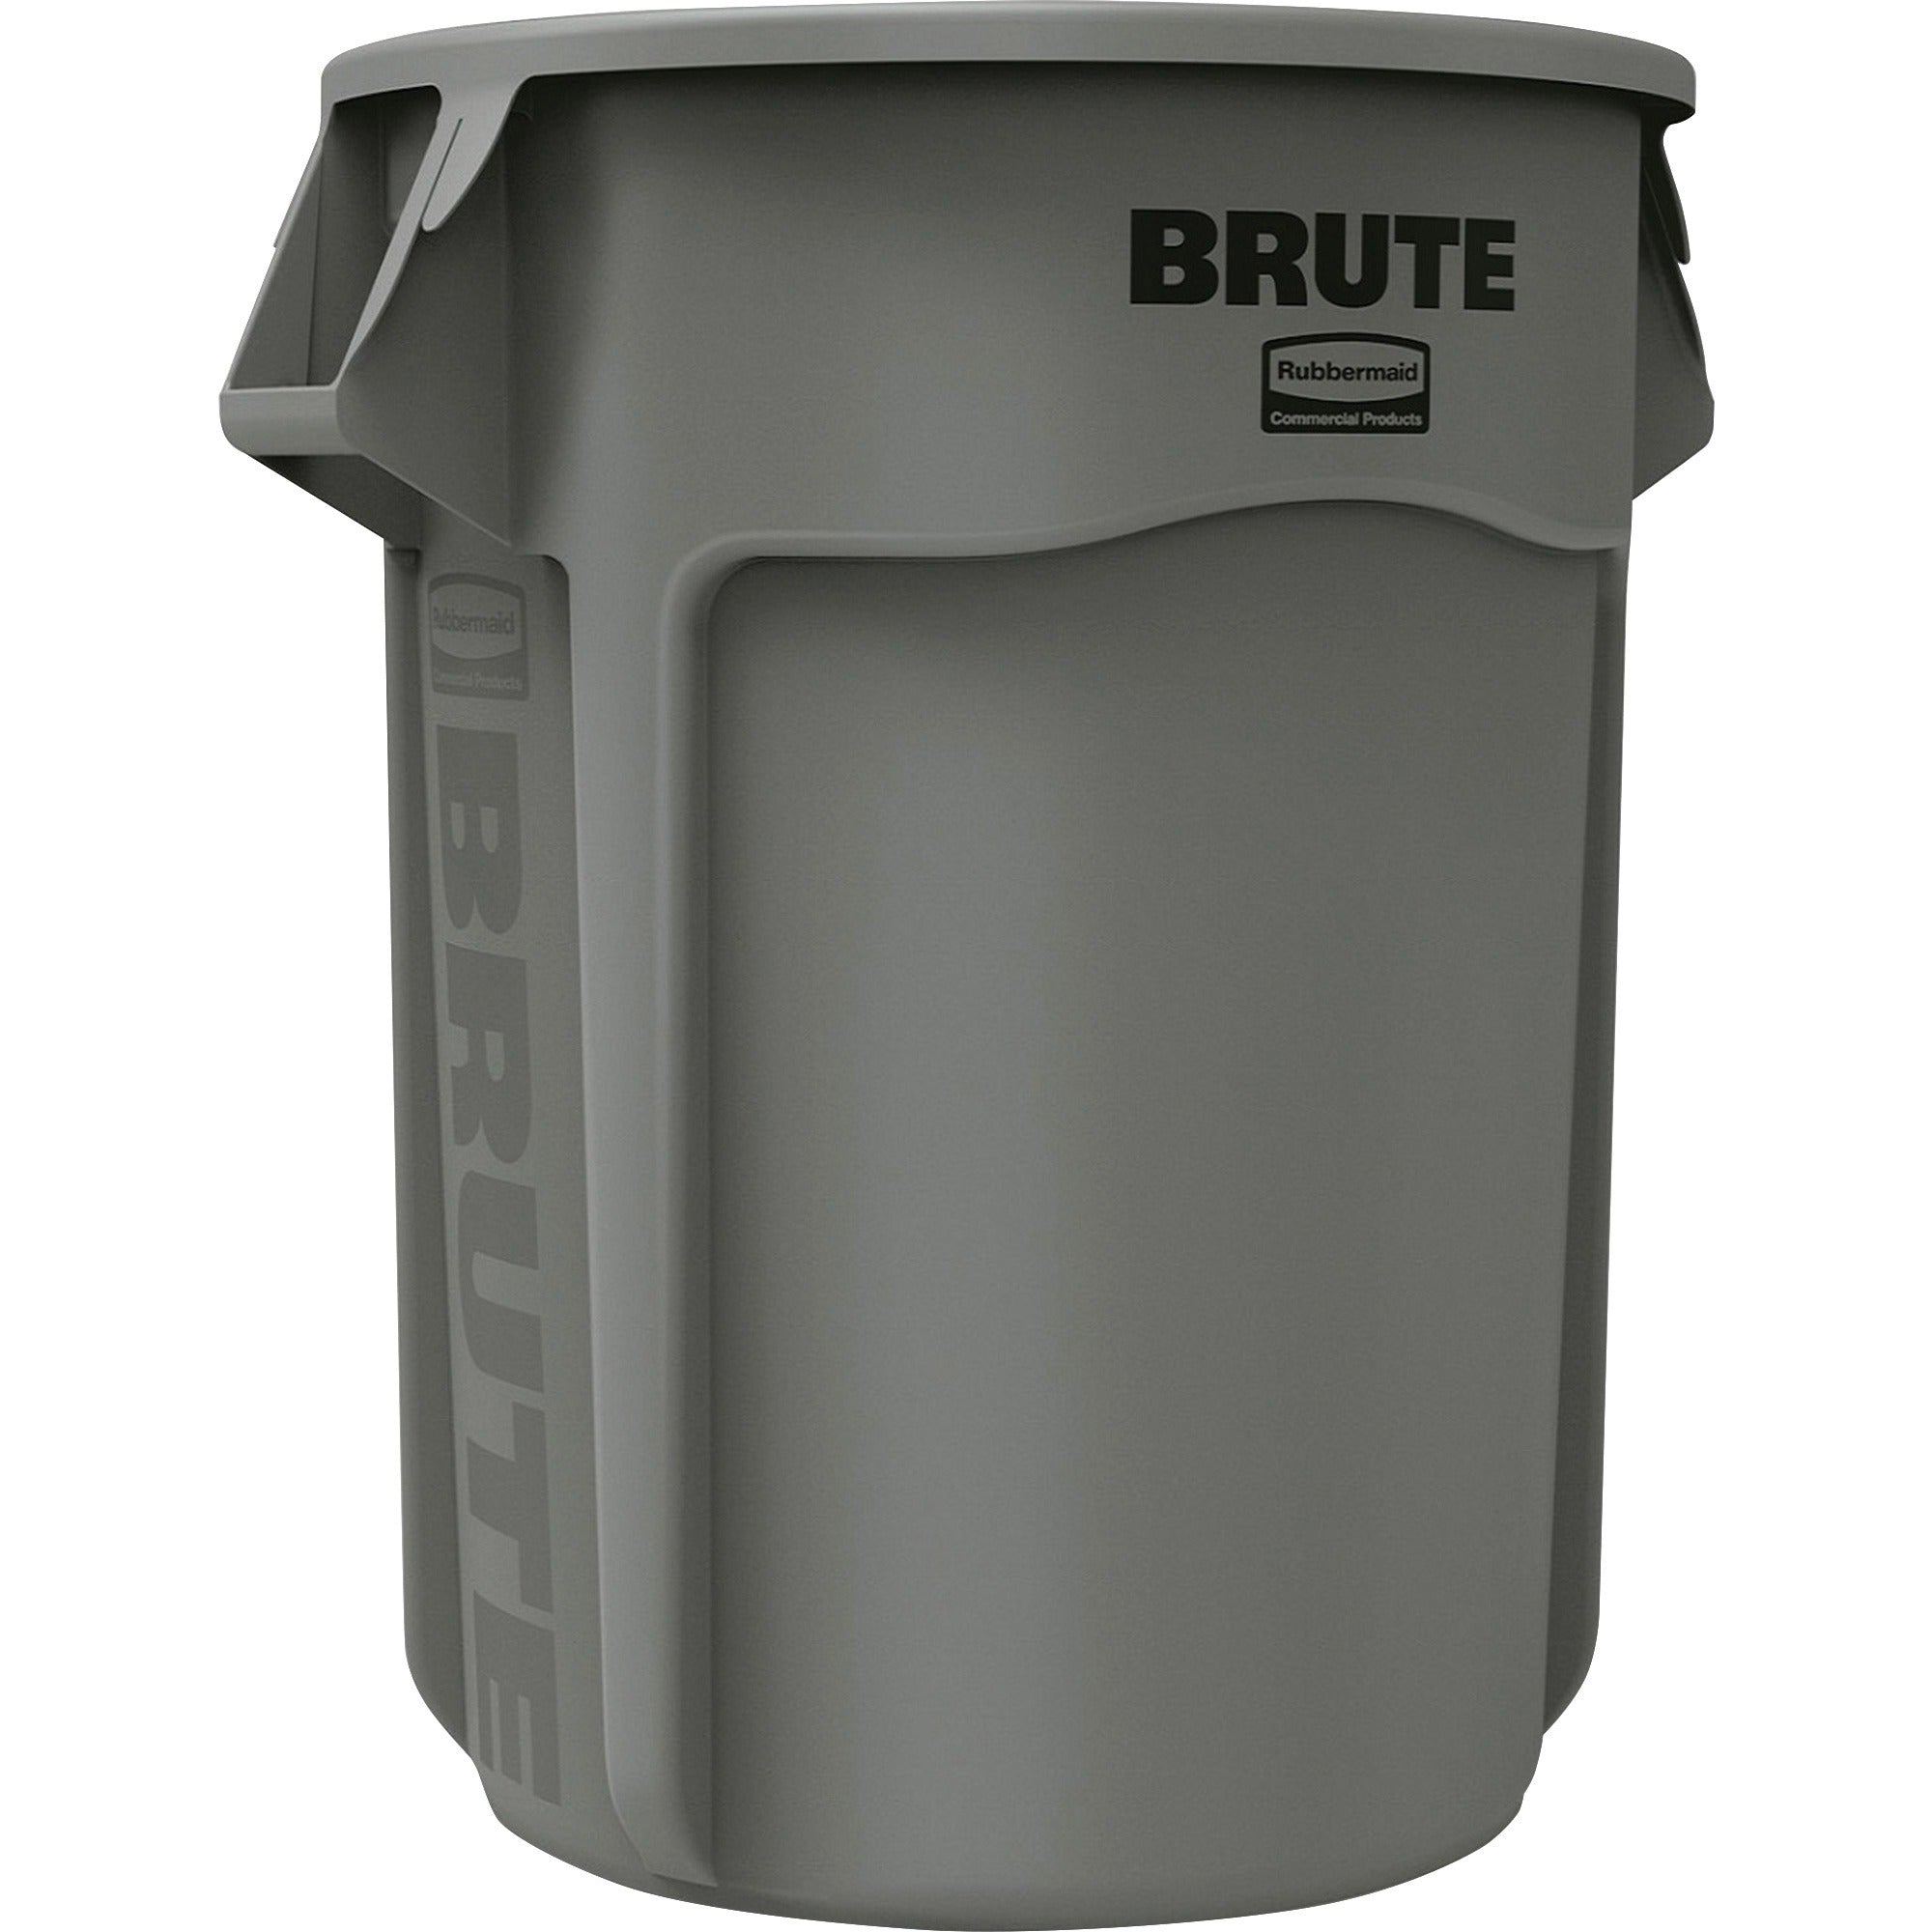 rubbermaid-commercial-brute-55-gallon-vented-containers-55-gal-capacity-round-handle-heavy-duty-reinforced-uv-coated-damage-resistant-fade-resistant-33-height-x-264-diameter-gray-3-carton_rcp265500gyct - 1